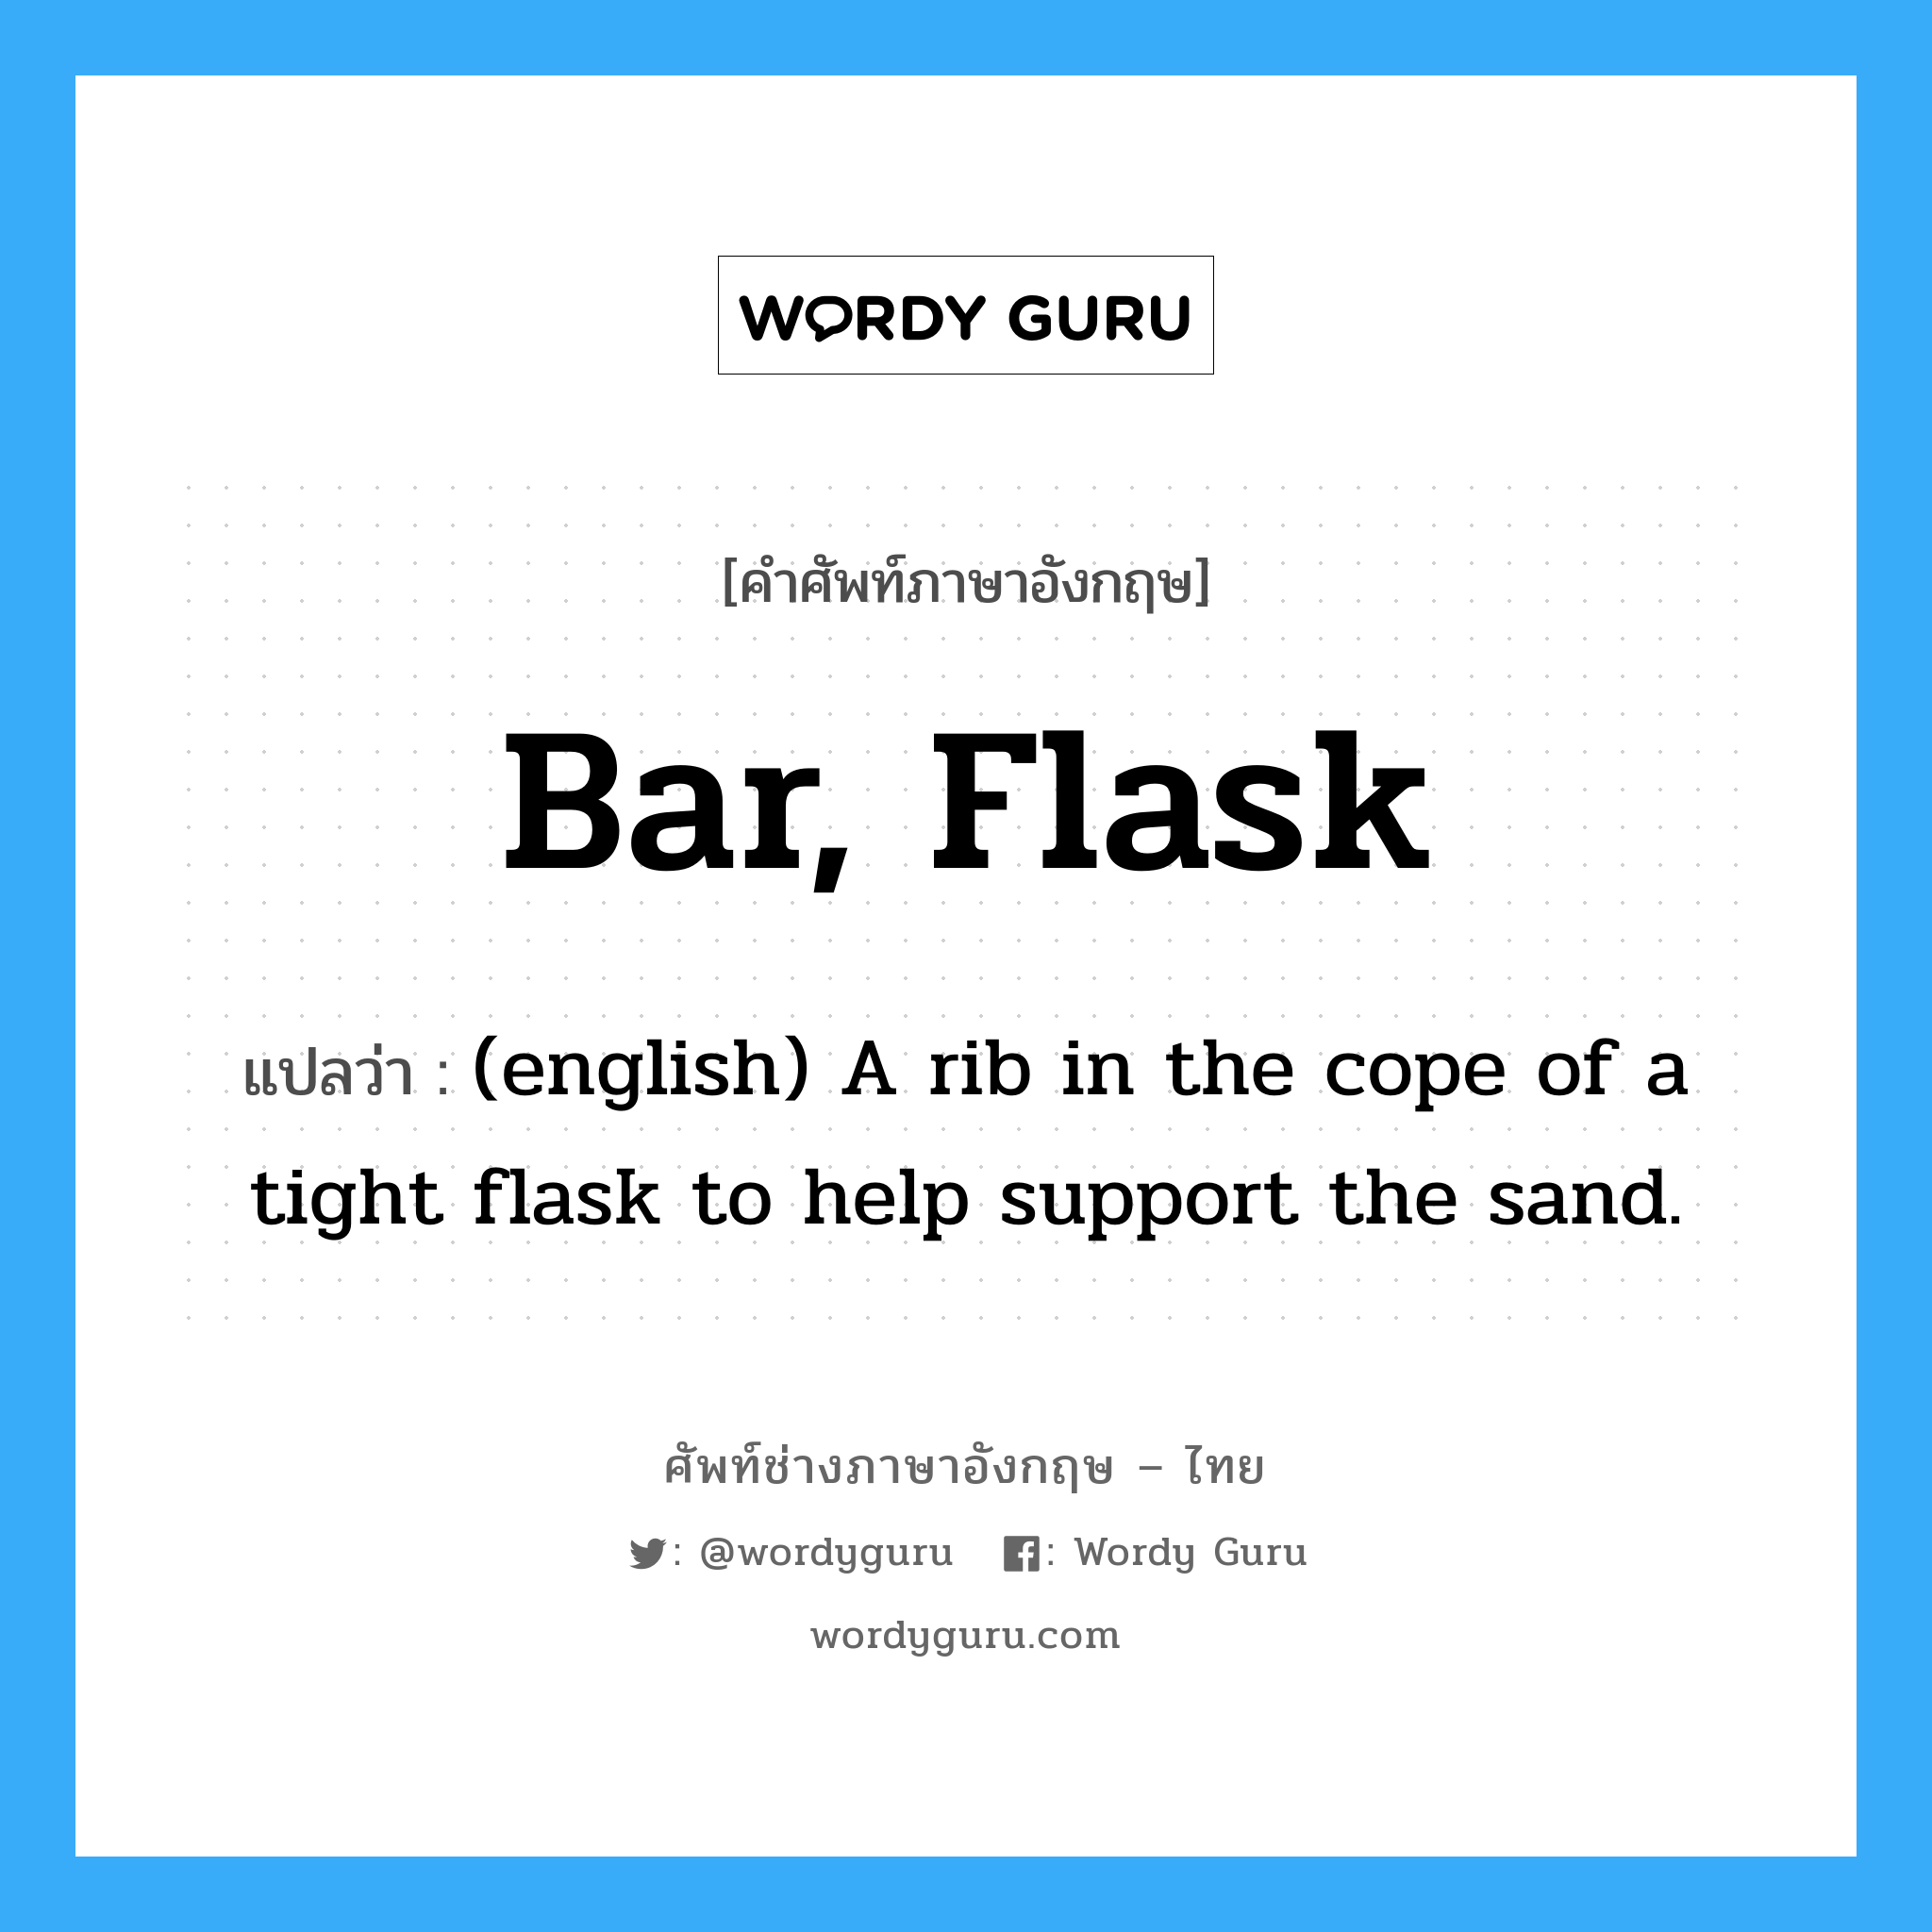 (english) A rib in the cope of a tight flask to help support the sand. ภาษาอังกฤษ?, คำศัพท์ช่างภาษาอังกฤษ - ไทย (english) A rib in the cope of a tight flask to help support the sand. คำศัพท์ภาษาอังกฤษ (english) A rib in the cope of a tight flask to help support the sand. แปลว่า Bar, Flask